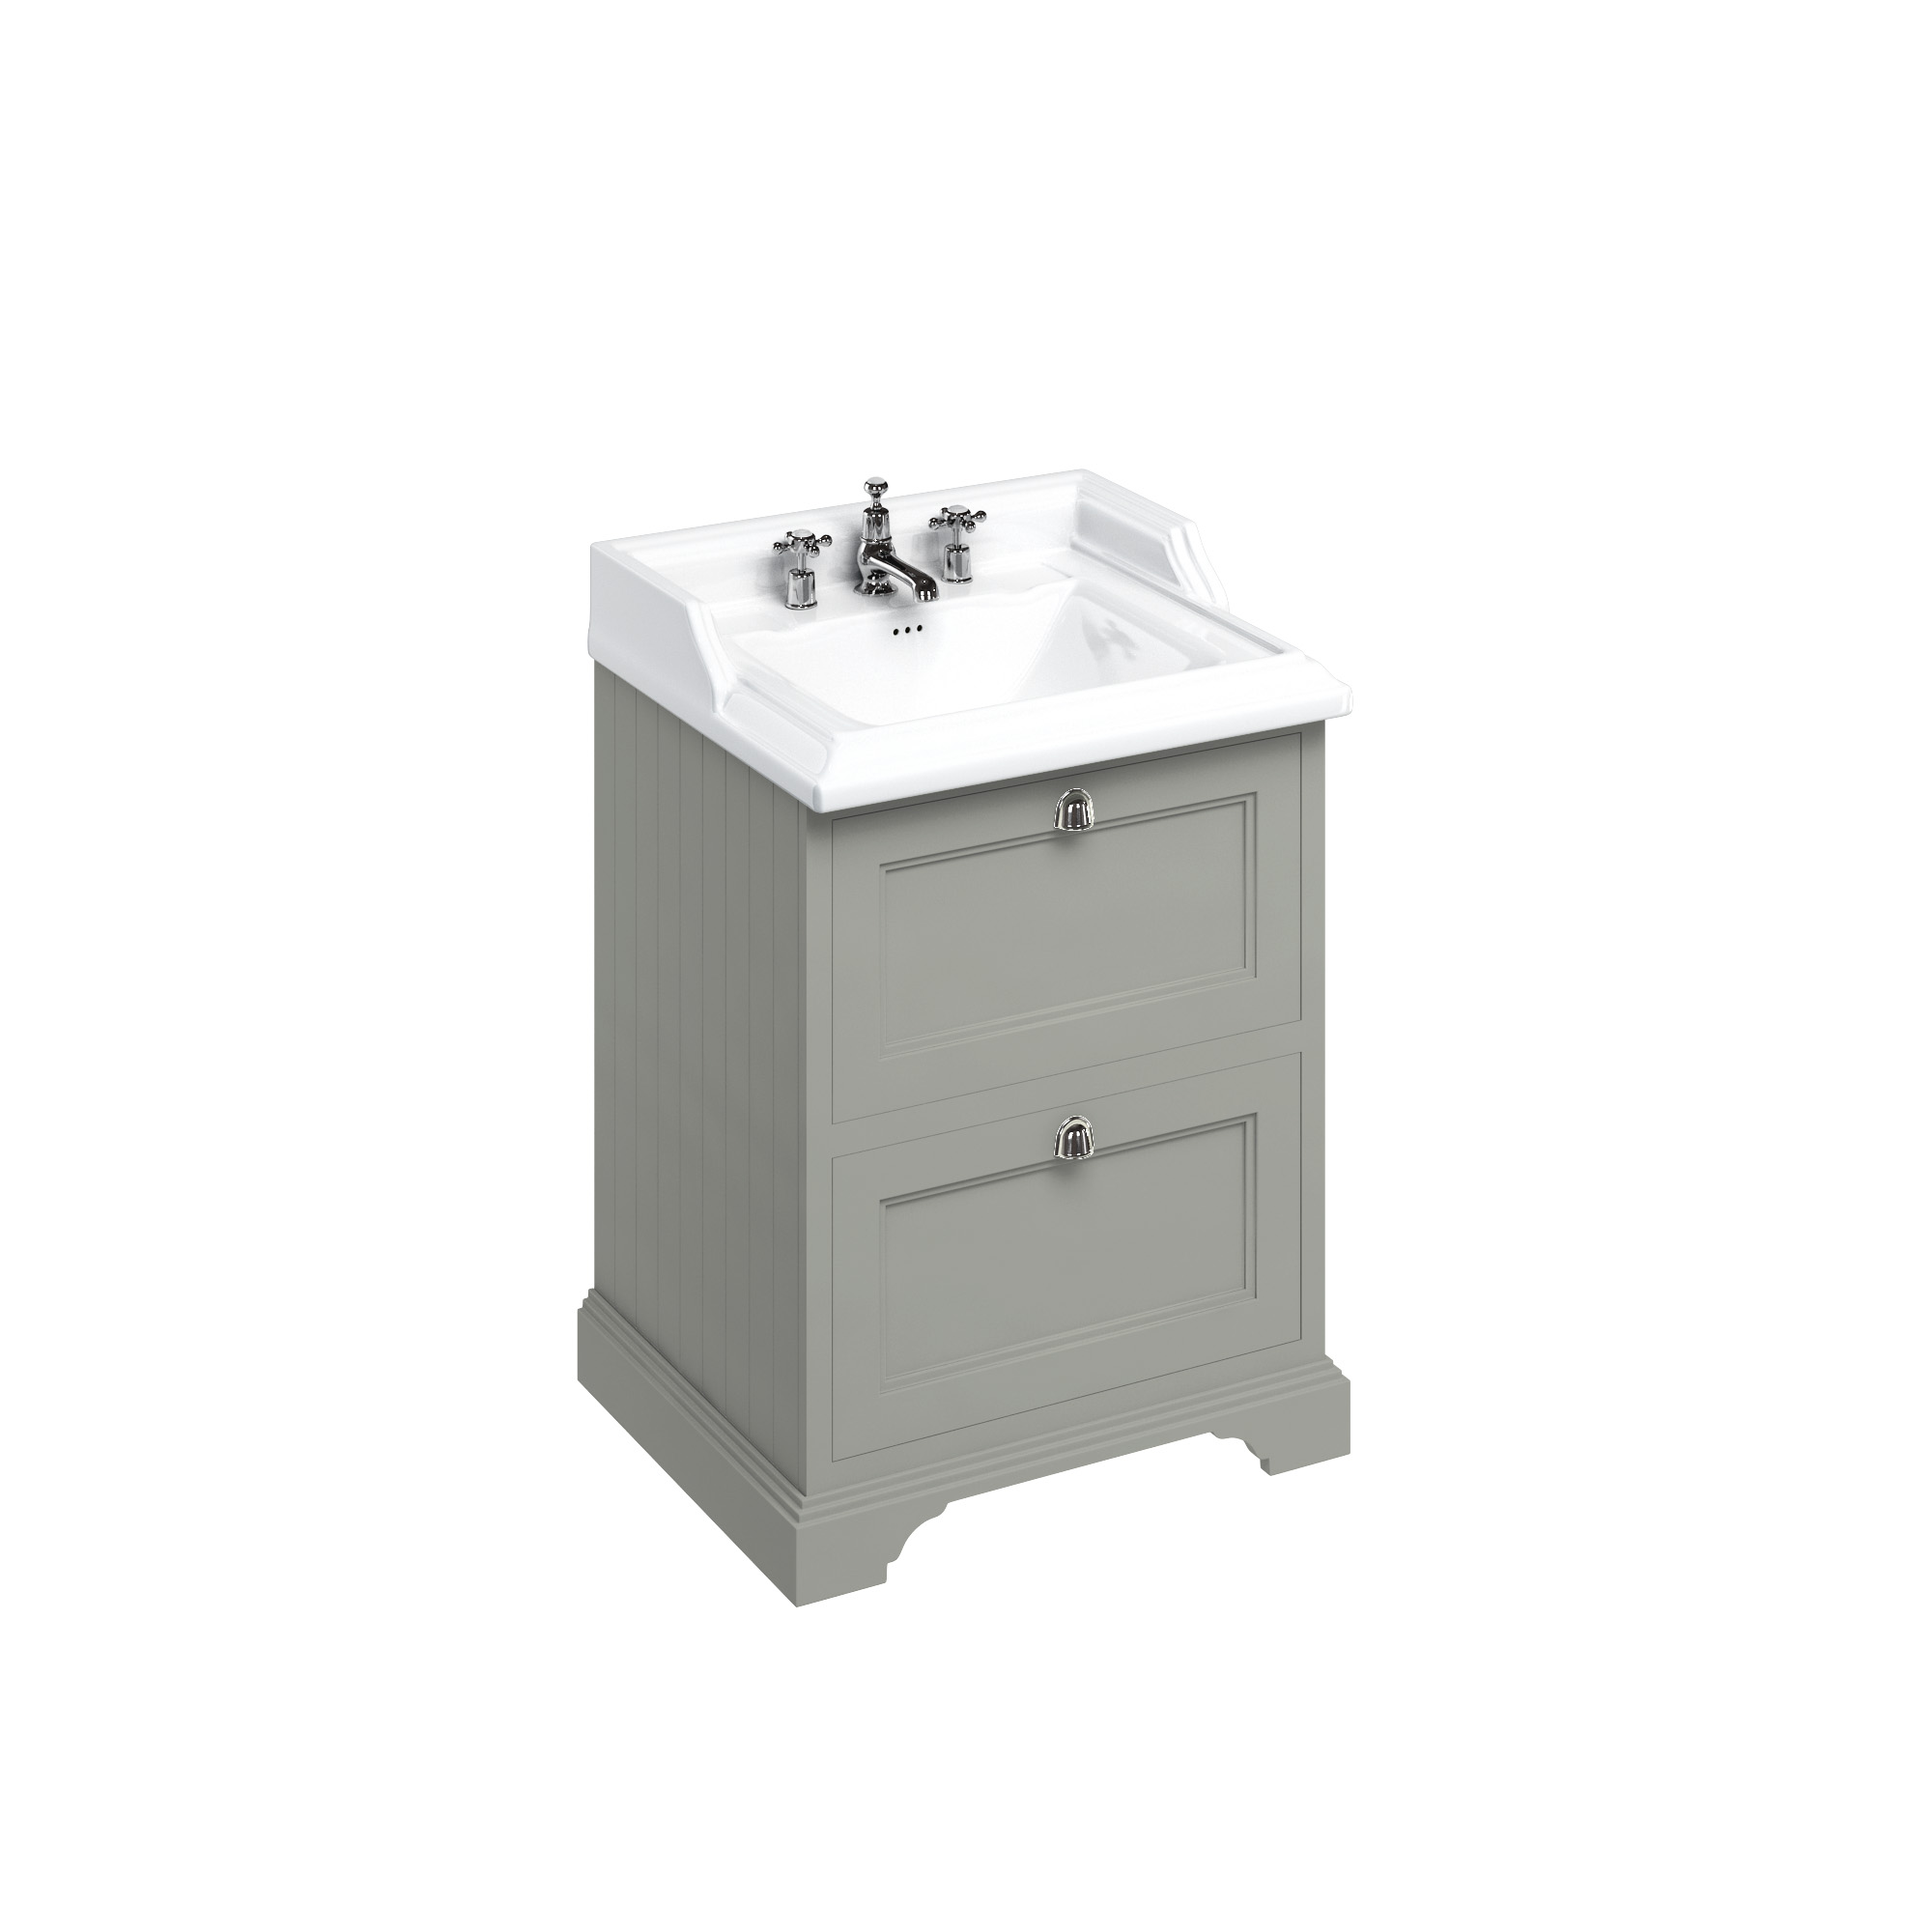 Freestanding 65 Vanity Unit with 2 drawers - Dark Olive and Classic basin 3 tap holes